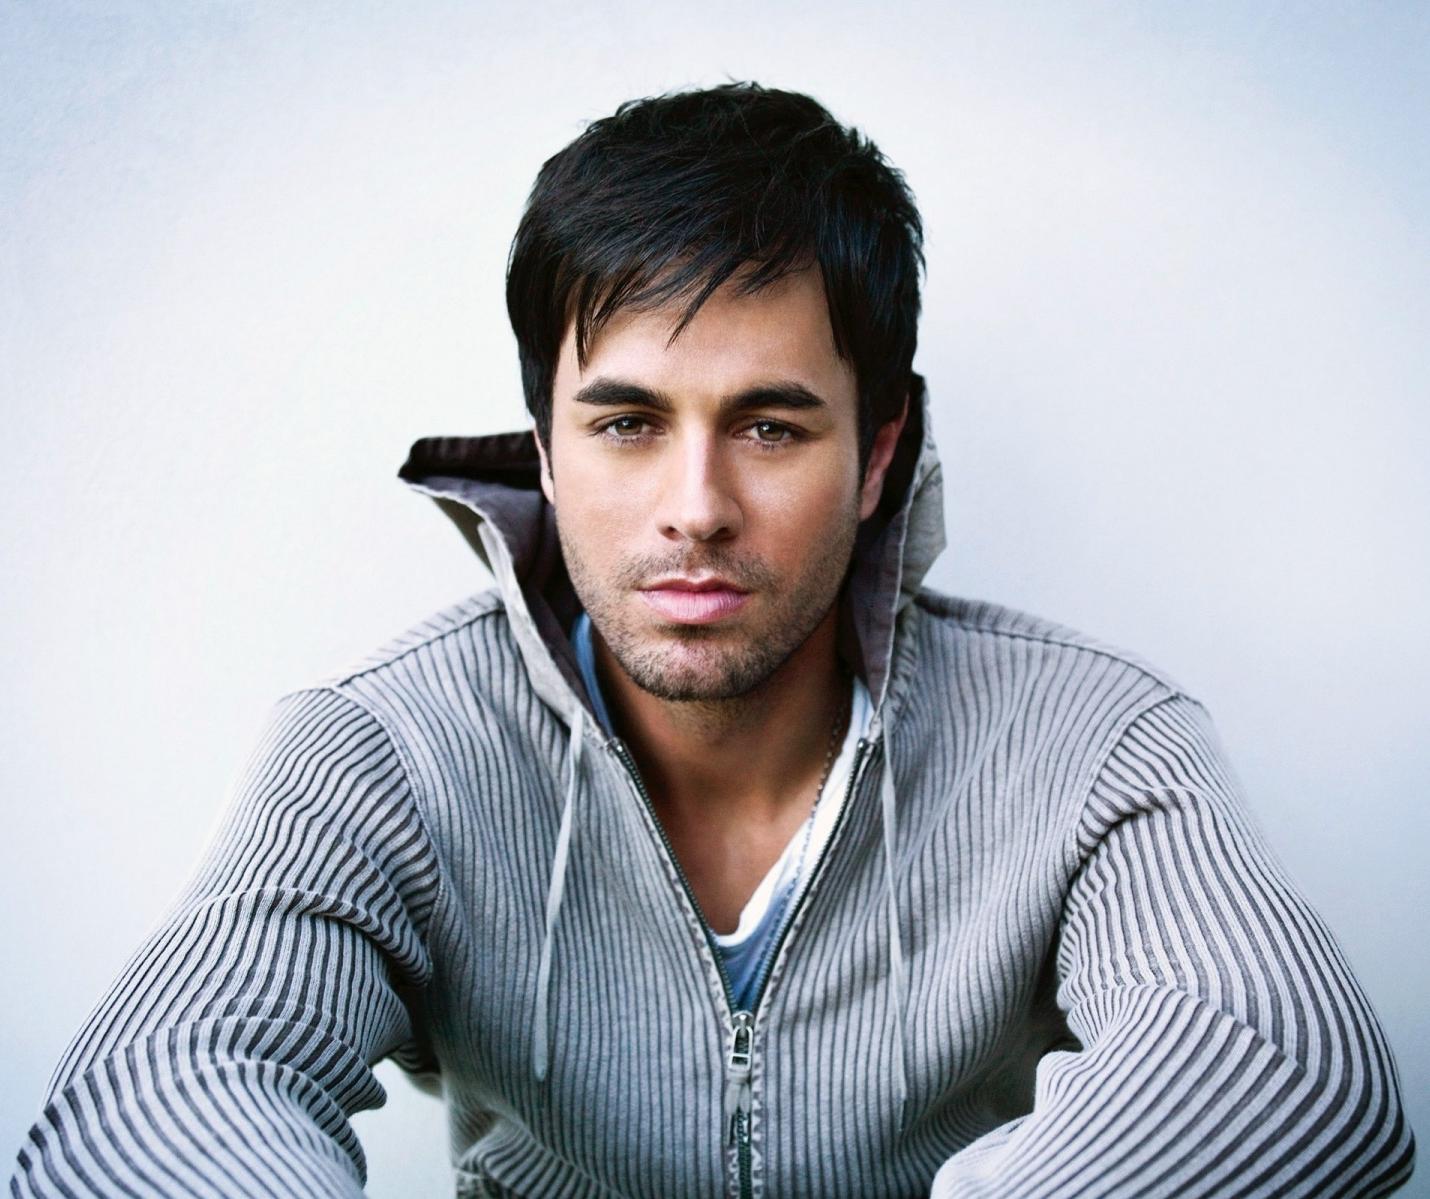 Men Hairstyles Short Long Medium Hairtyle Styling Tips New Trend Hairstyle Enrique Iglesias Hairstyles